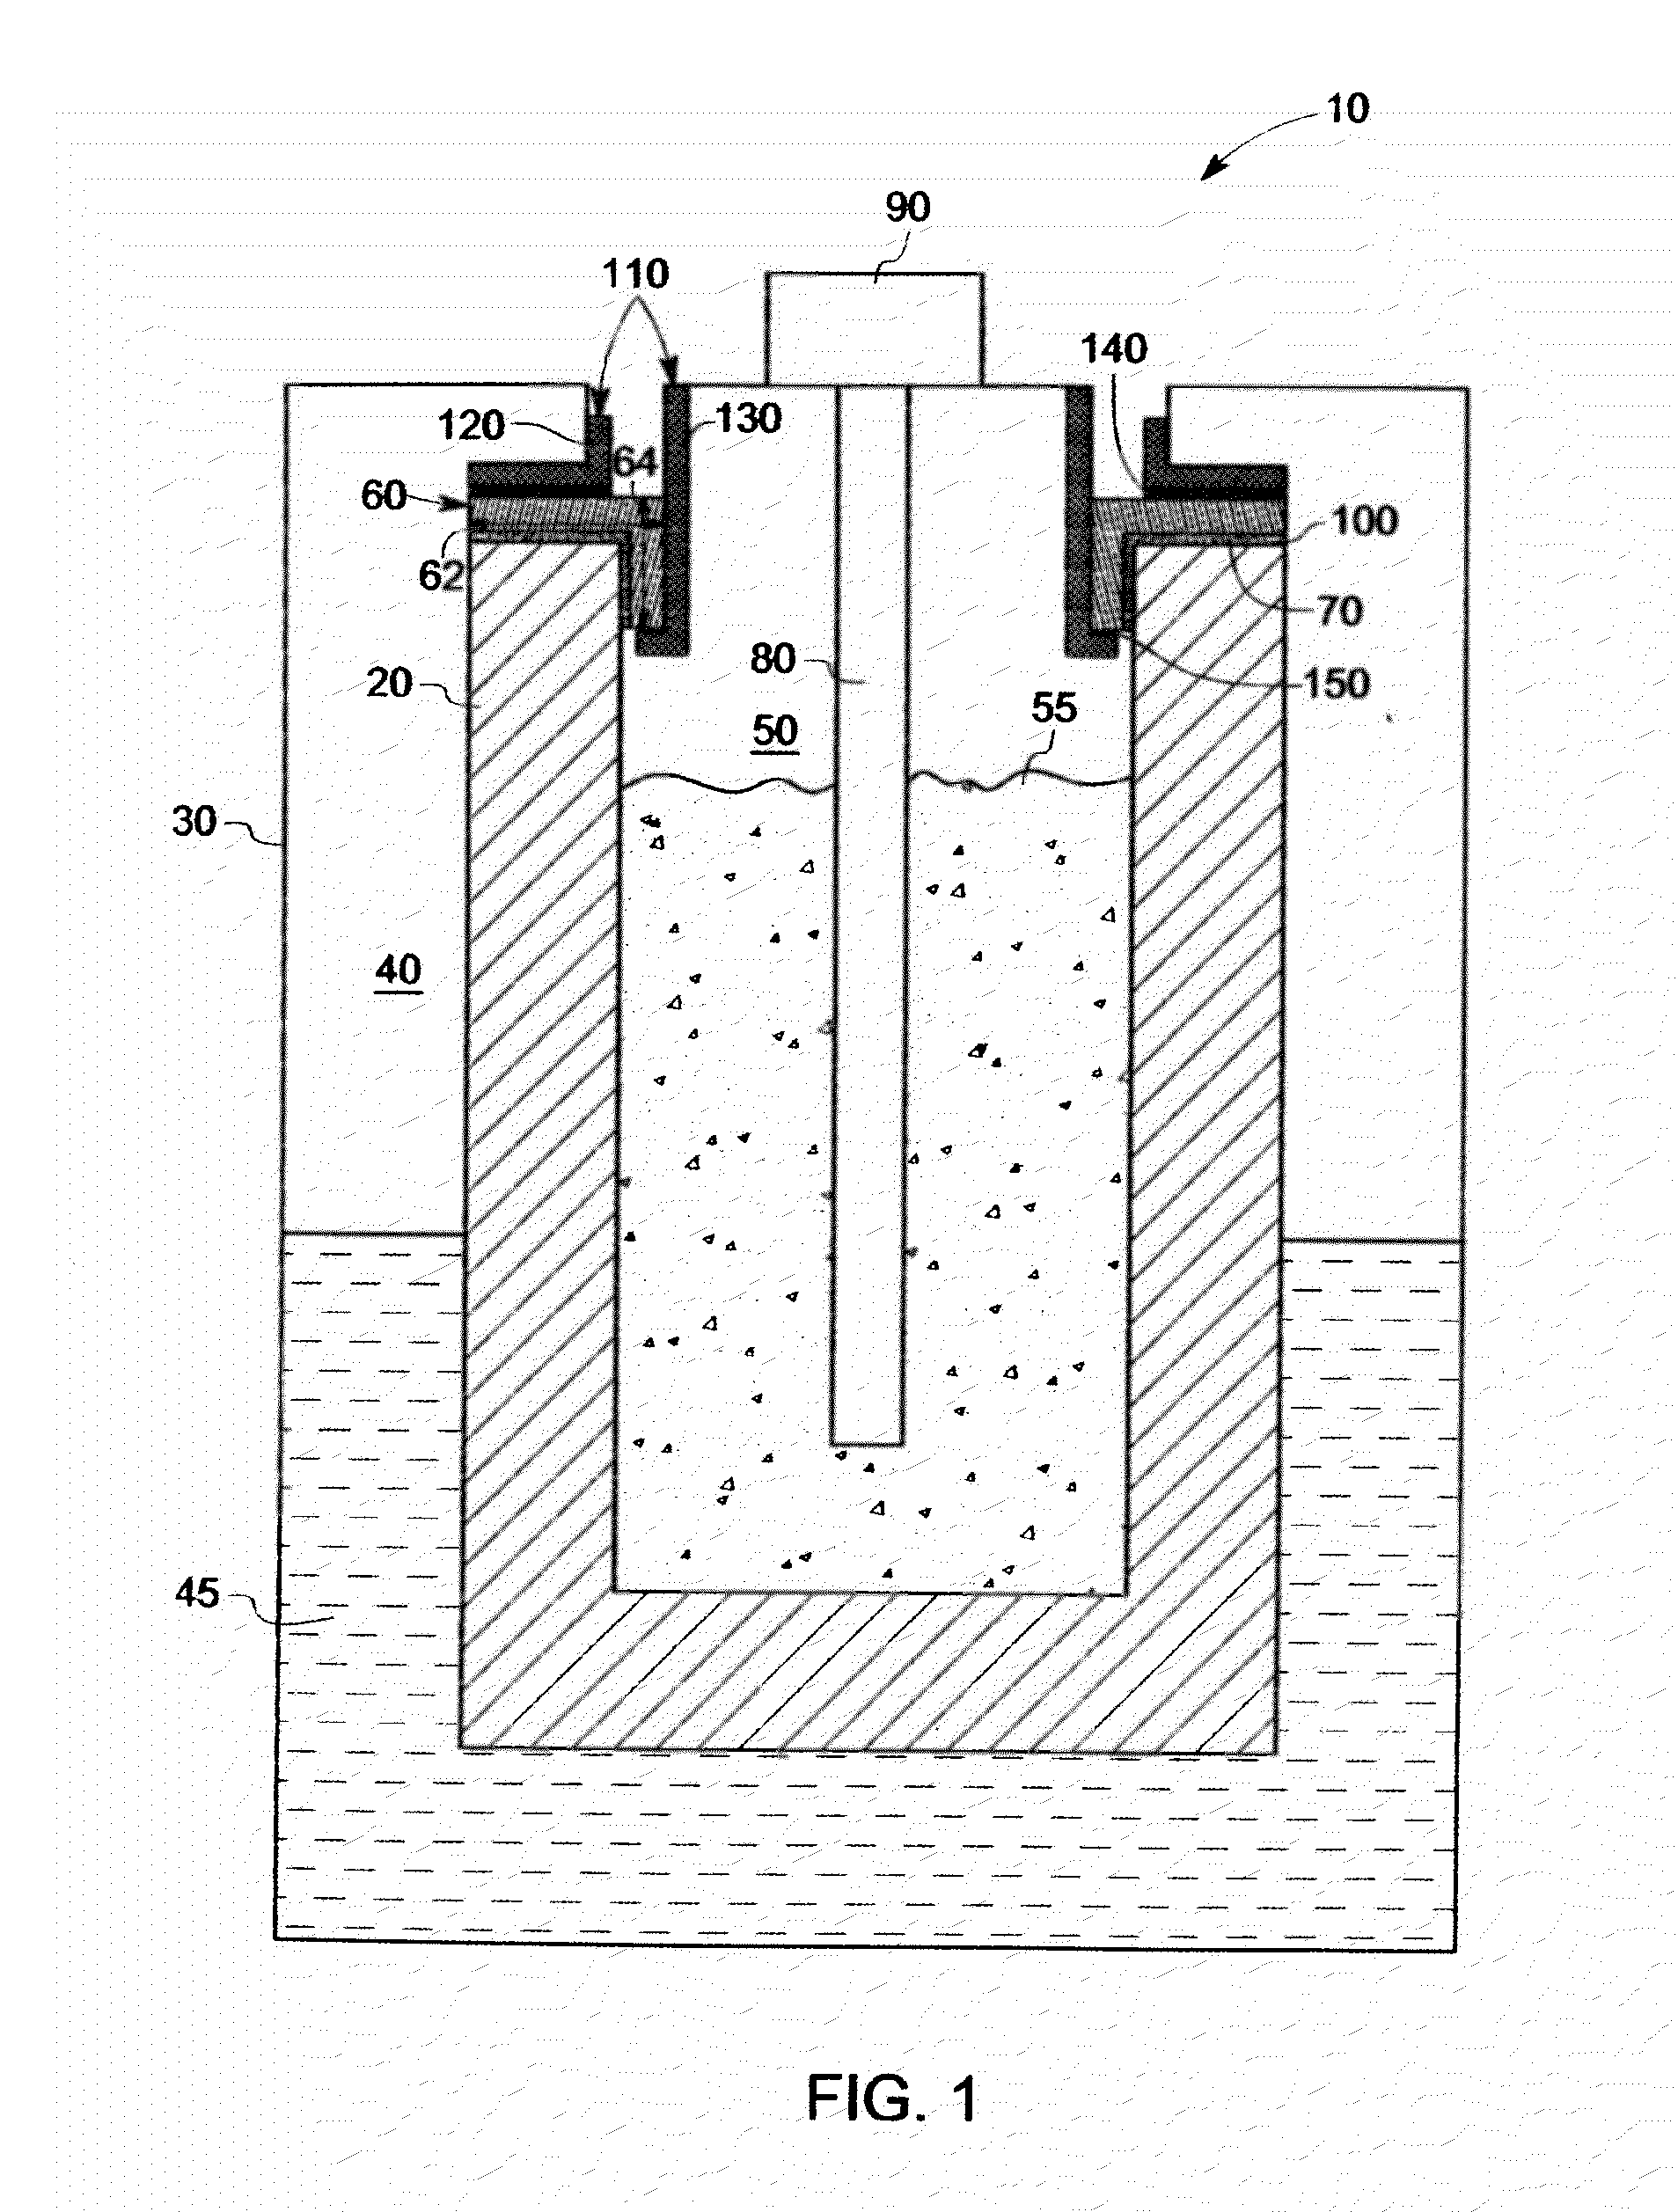 Metallic compositions useful for brazing, and related processes and devices